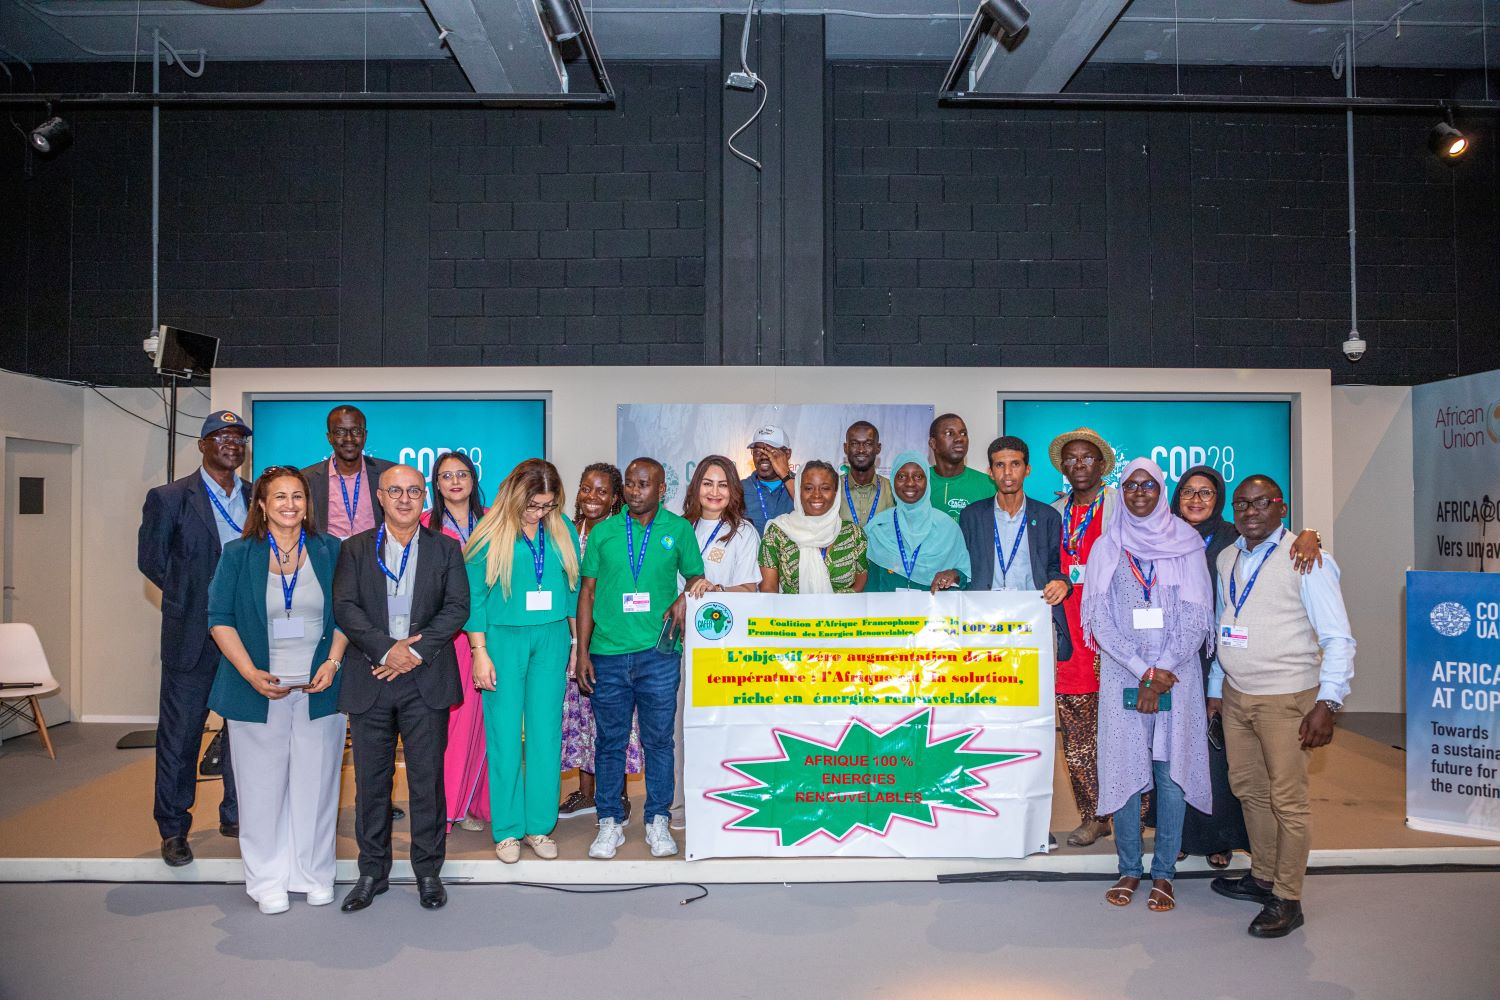 A group of people of varying races and gender presentations stand together on stage around a banner with text in French. Behind them are screens that say "COP28."